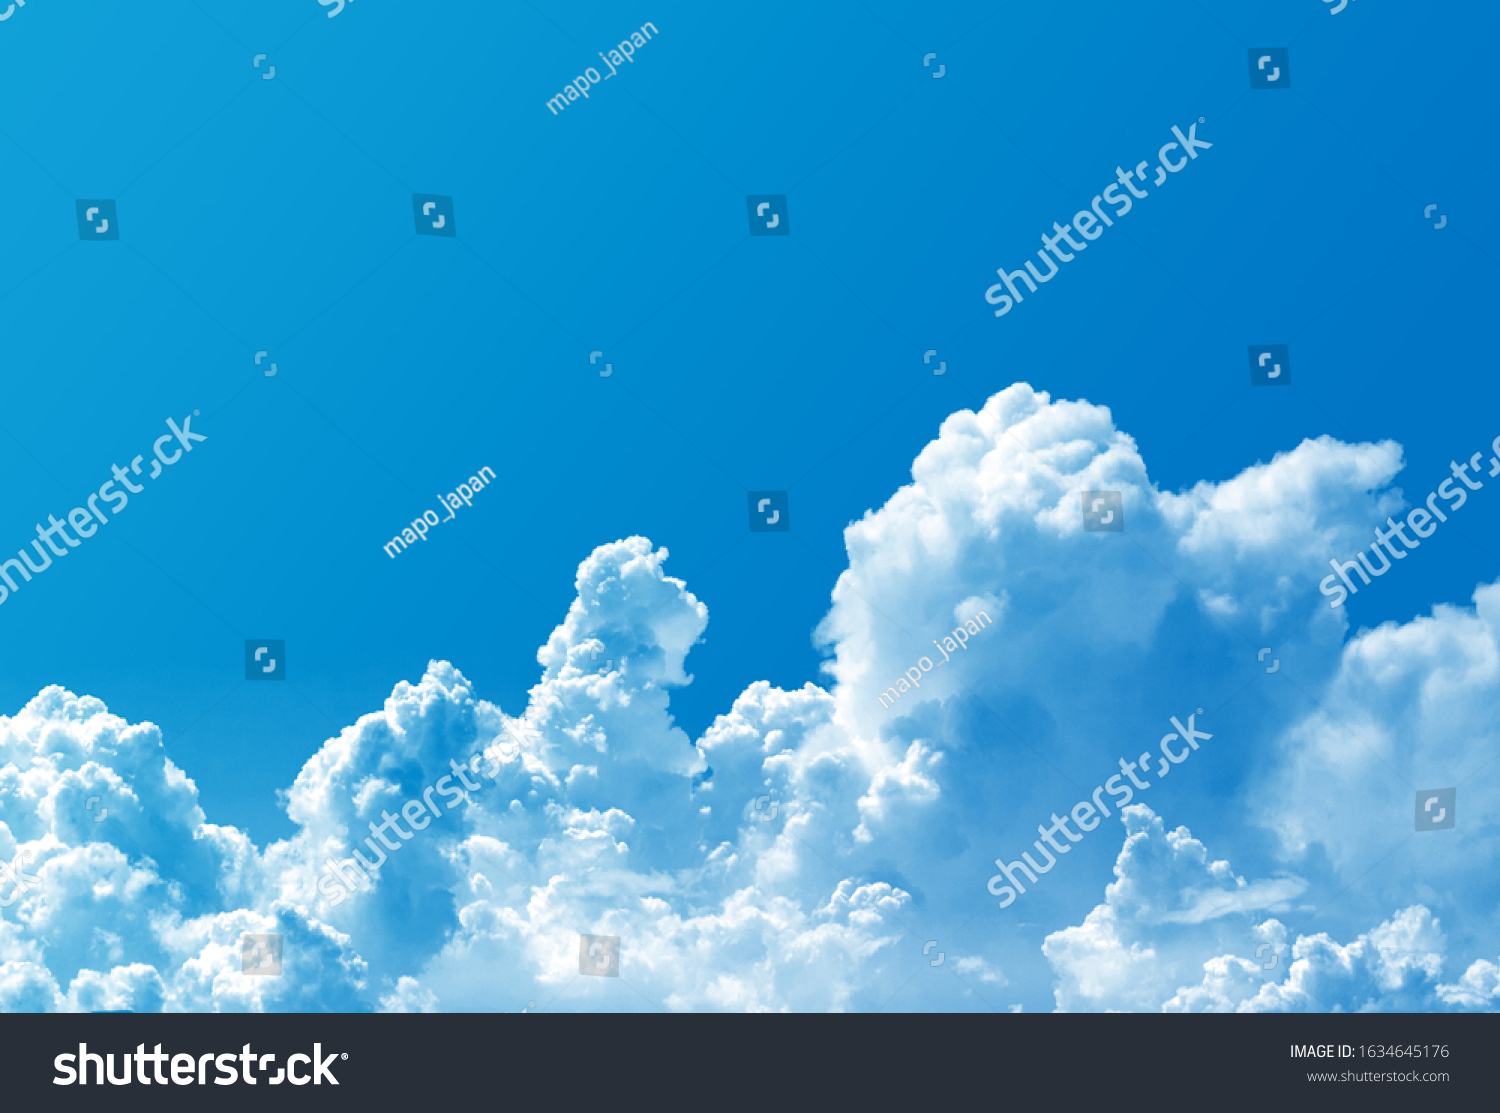 Background material, anime like clouds #1634645176